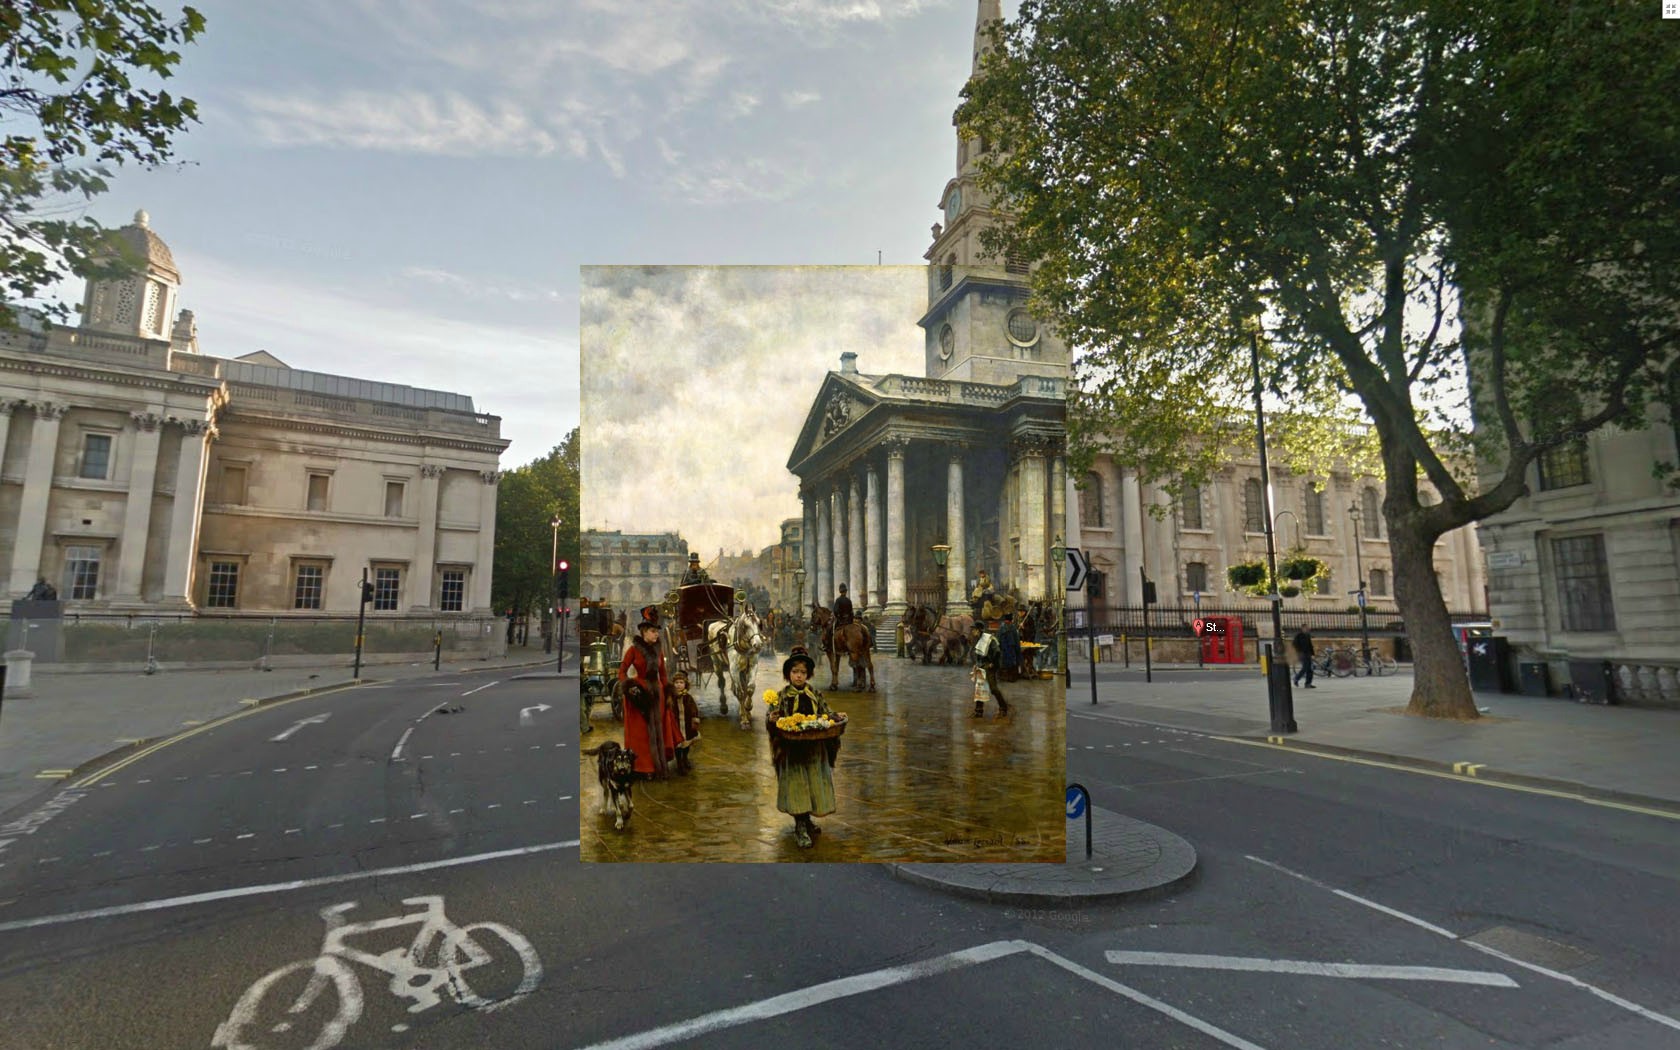 Impressive Images Mix Classic Paintings And Modern London Street Views